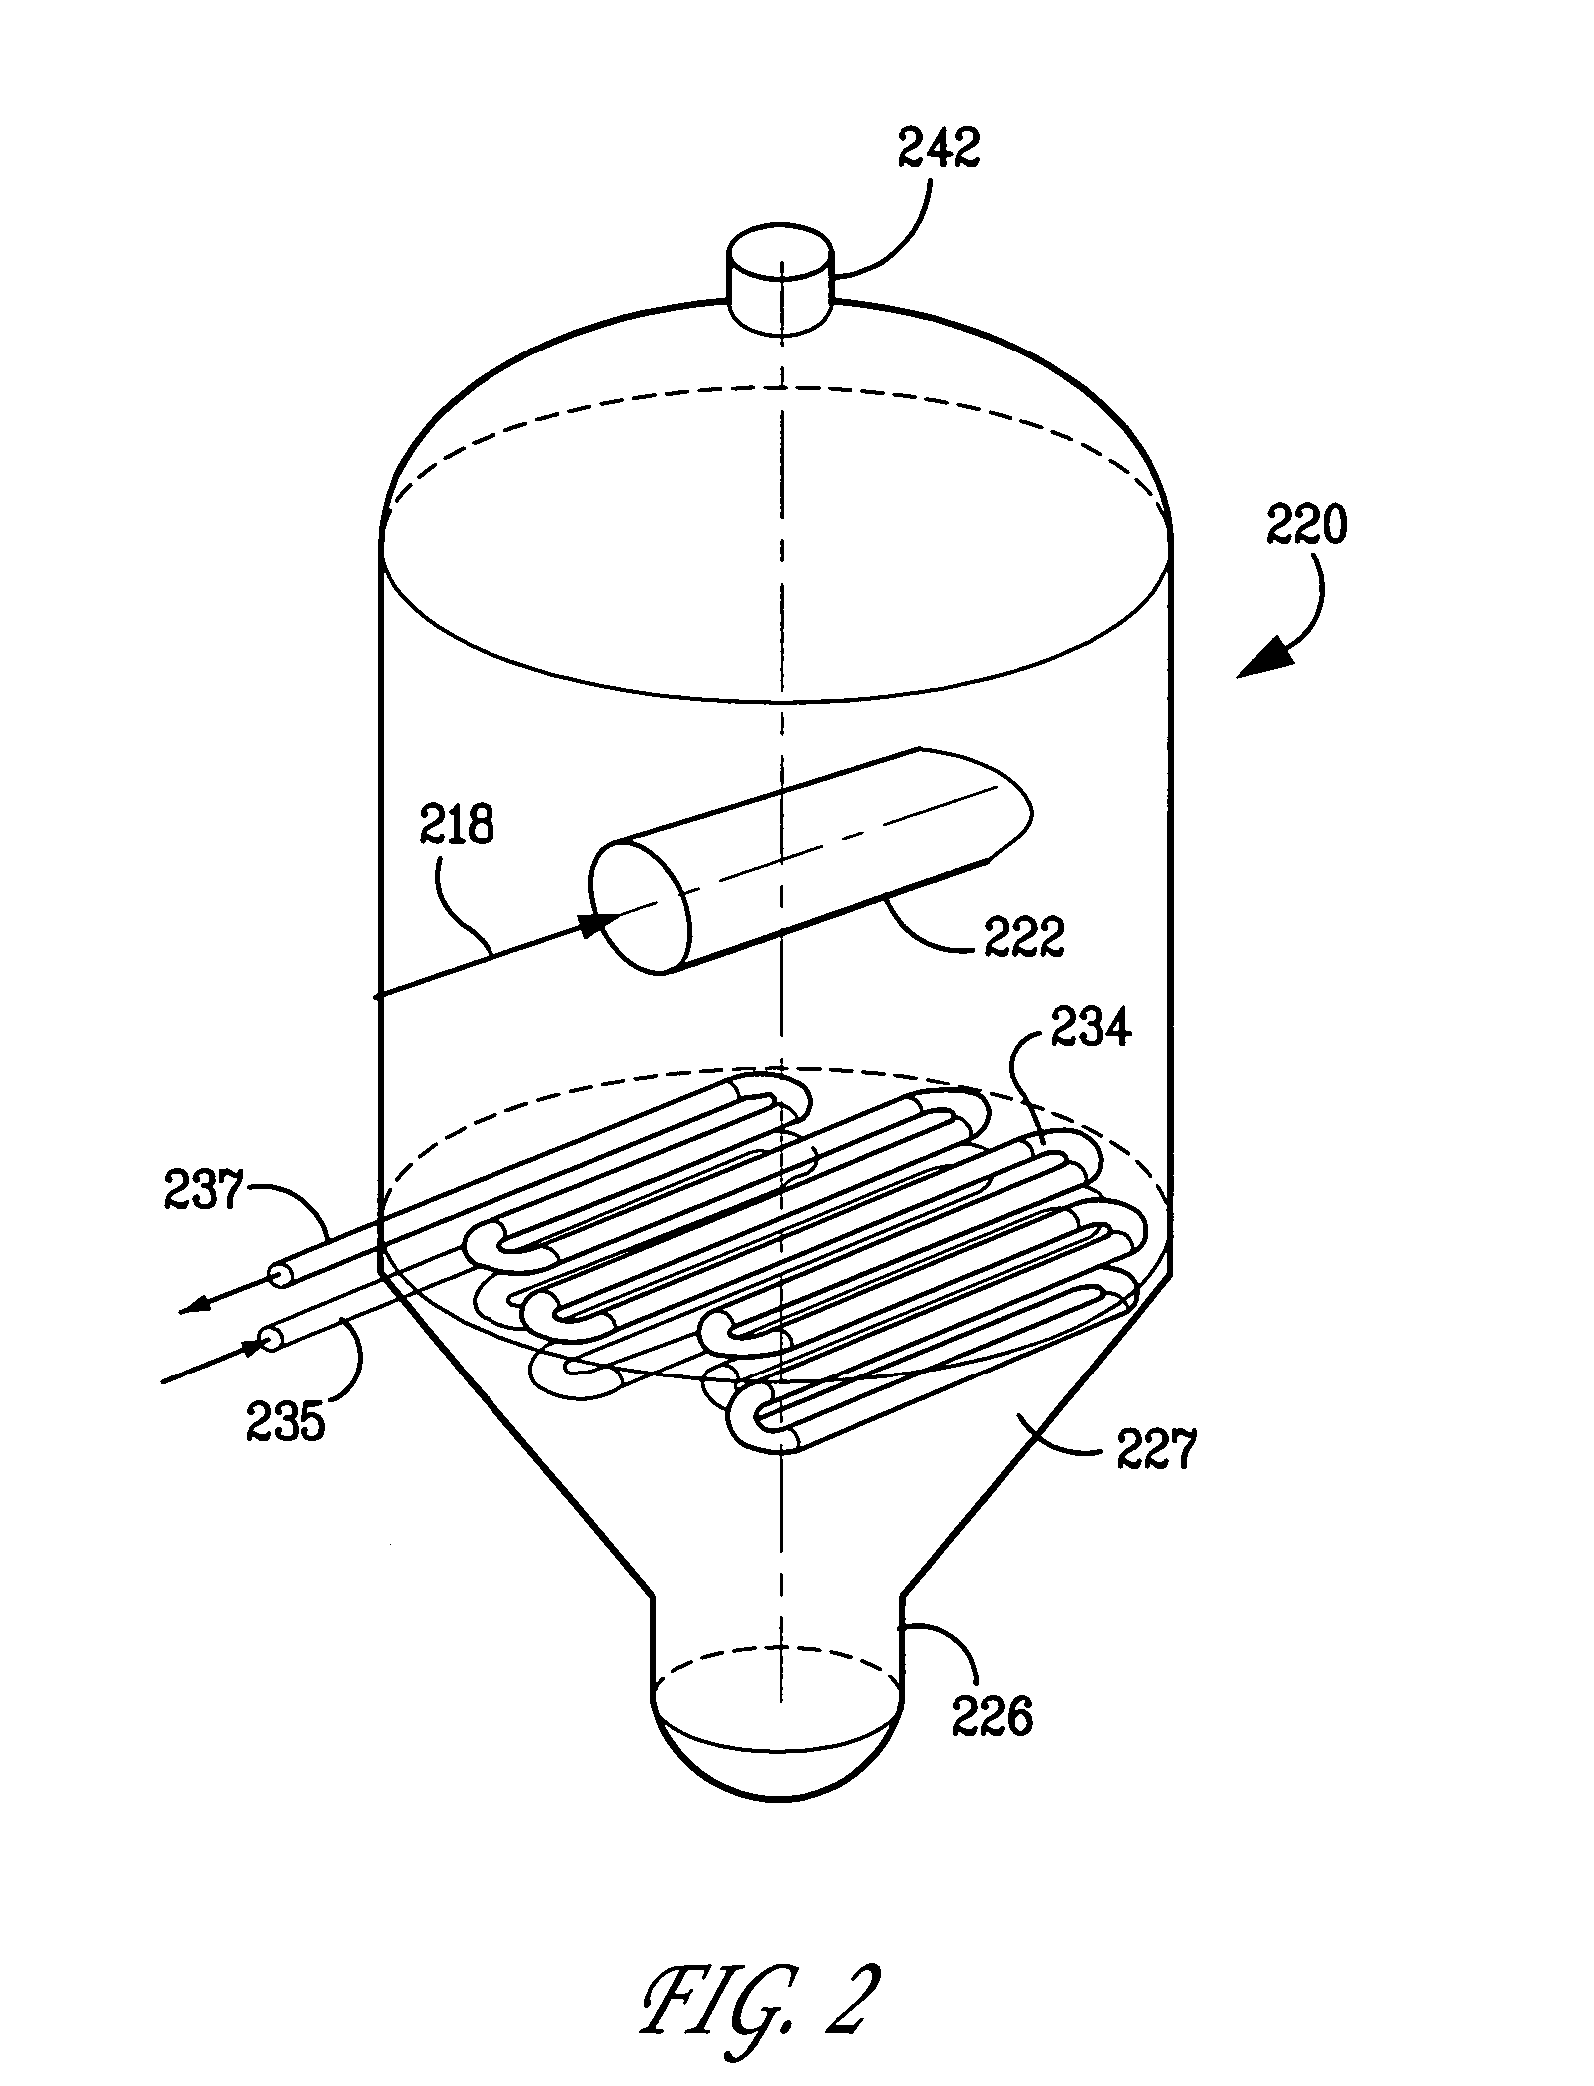 Process and apparatus for cracking hydrocarbon feedstock containing resid to improve vapor yield from vapor/liquid separation